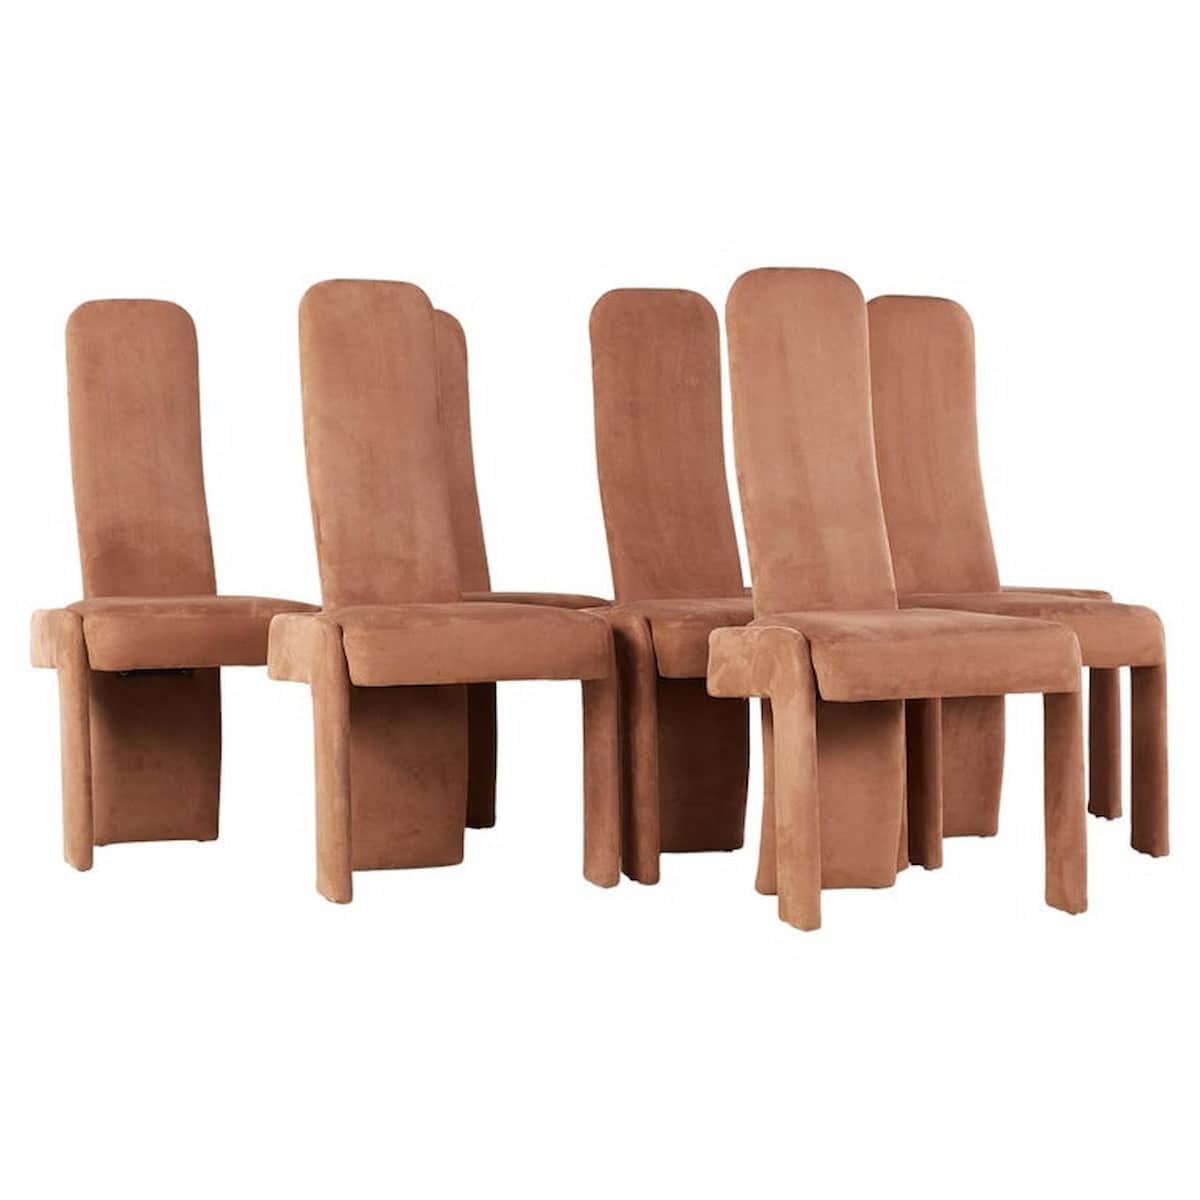 Pierre Cardin Mid Century Dining Chairs - Set of 8